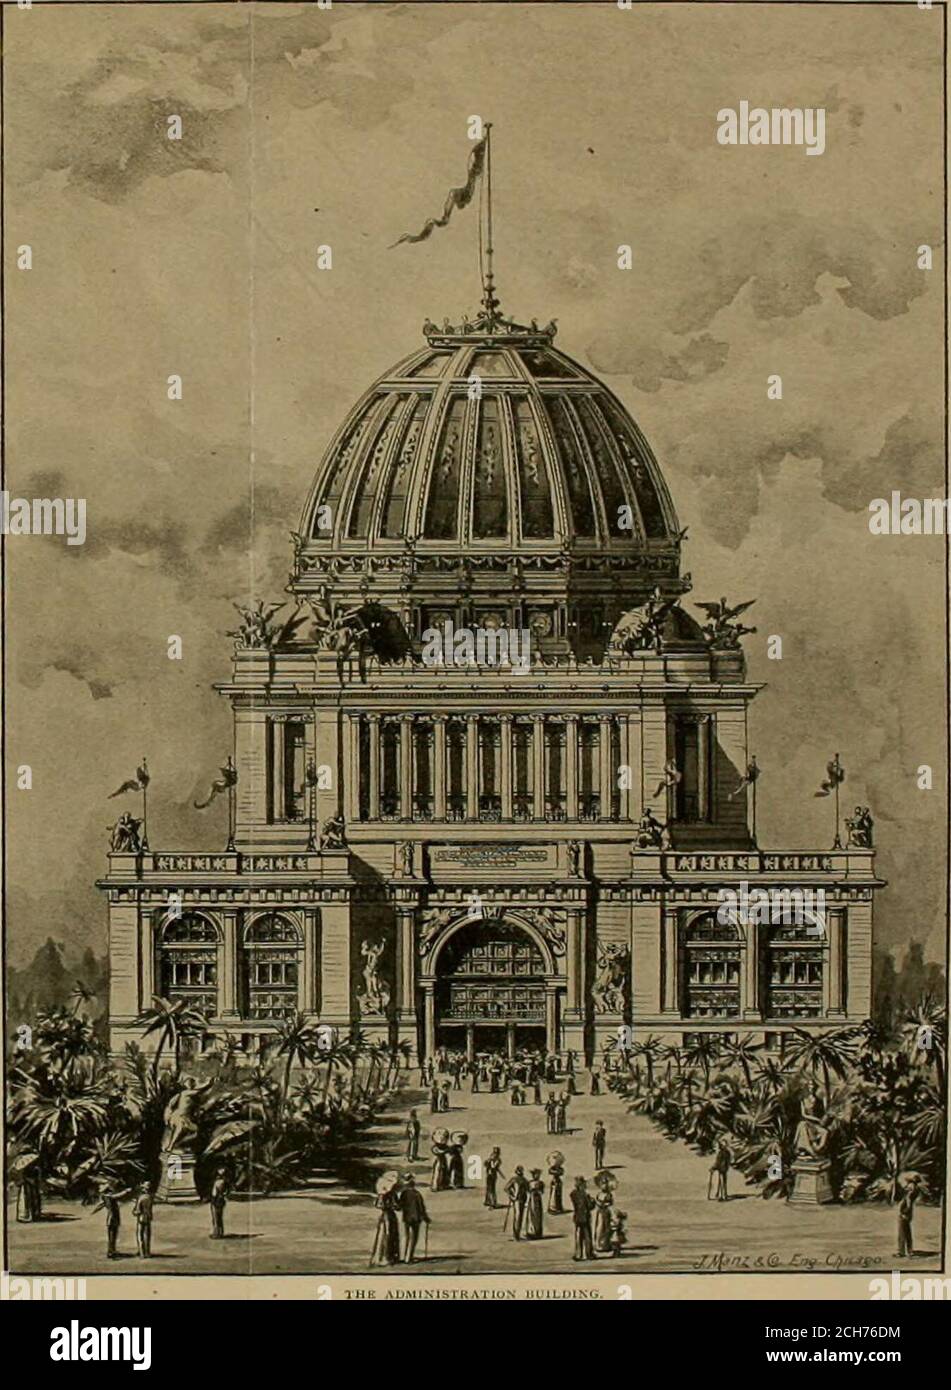 . The street railway review . Tm-: Administration Buildinfj is pronounced the gemand crown of the exposition palaces. It is at the westend of the great court looking eastward, with the trans-portation facilities and depots at the west. The gildeddome of this lofty building is 120 feet in diameter and portions, and crewned with sculpture; the second storyis of the Ionic order, the whole forming a design in thestyle of the French renaissance. The interior features of this great building are in keep-ing with the external. The underside of the dome is. 220 feet in height, and will attract the atte Stock Photo